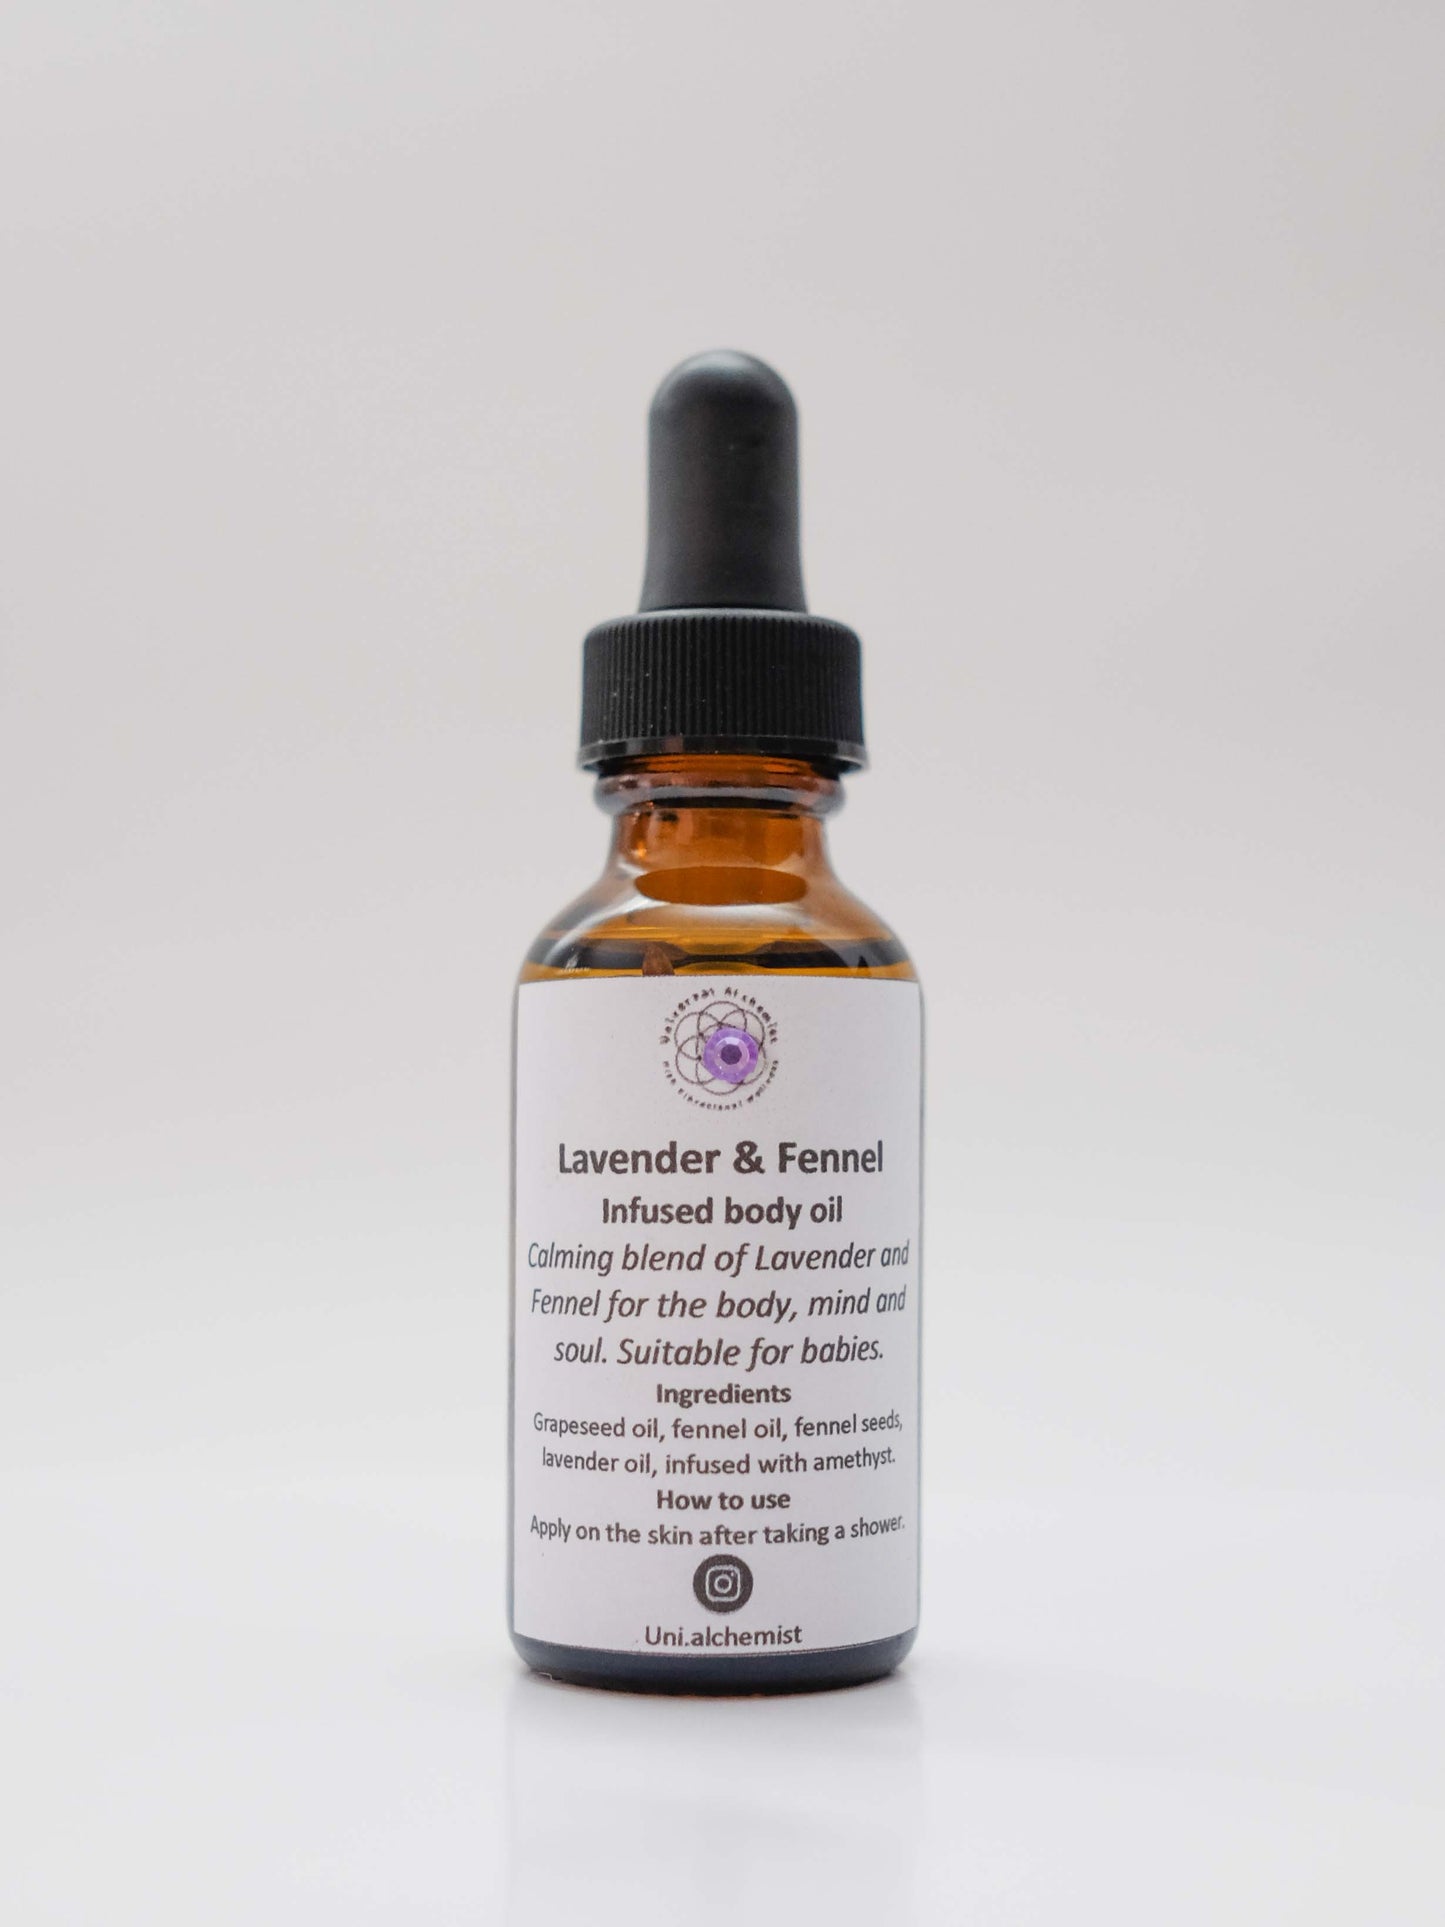 Lavender & Fennel Infused Body Oil